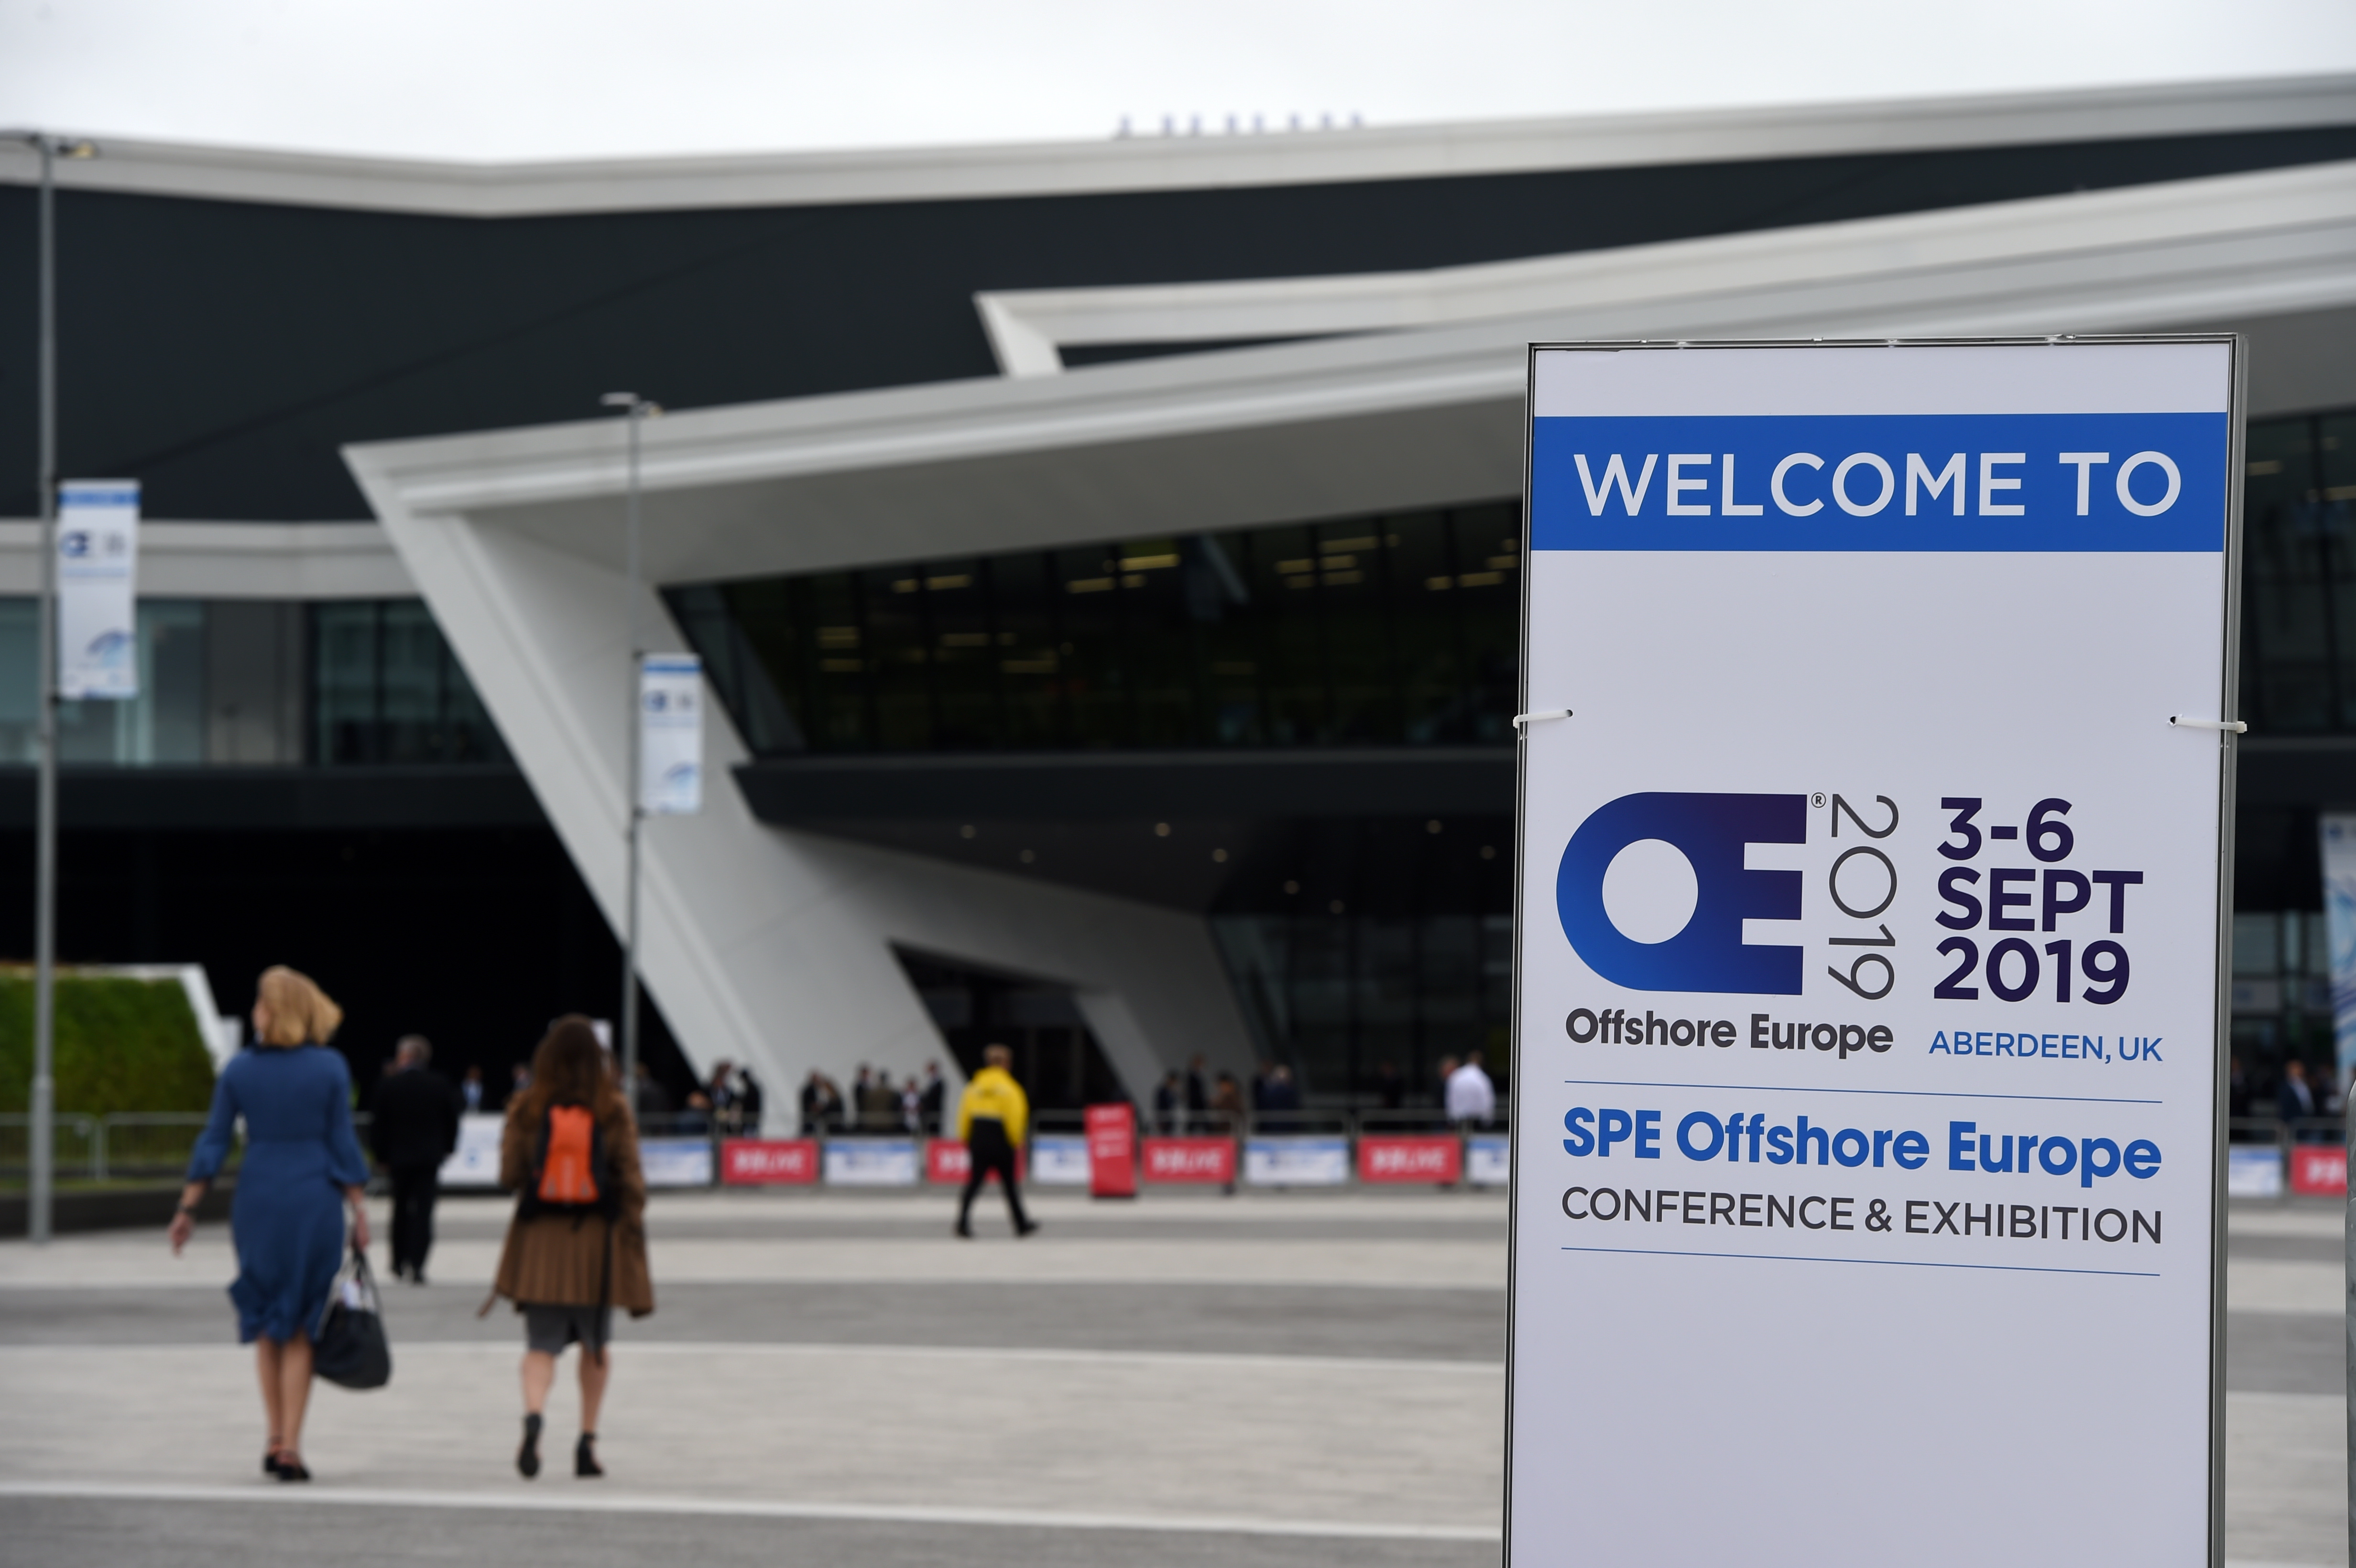 The SPE Offshore Europe 2019, at P&J Live.

Picture by Kenny Elrick